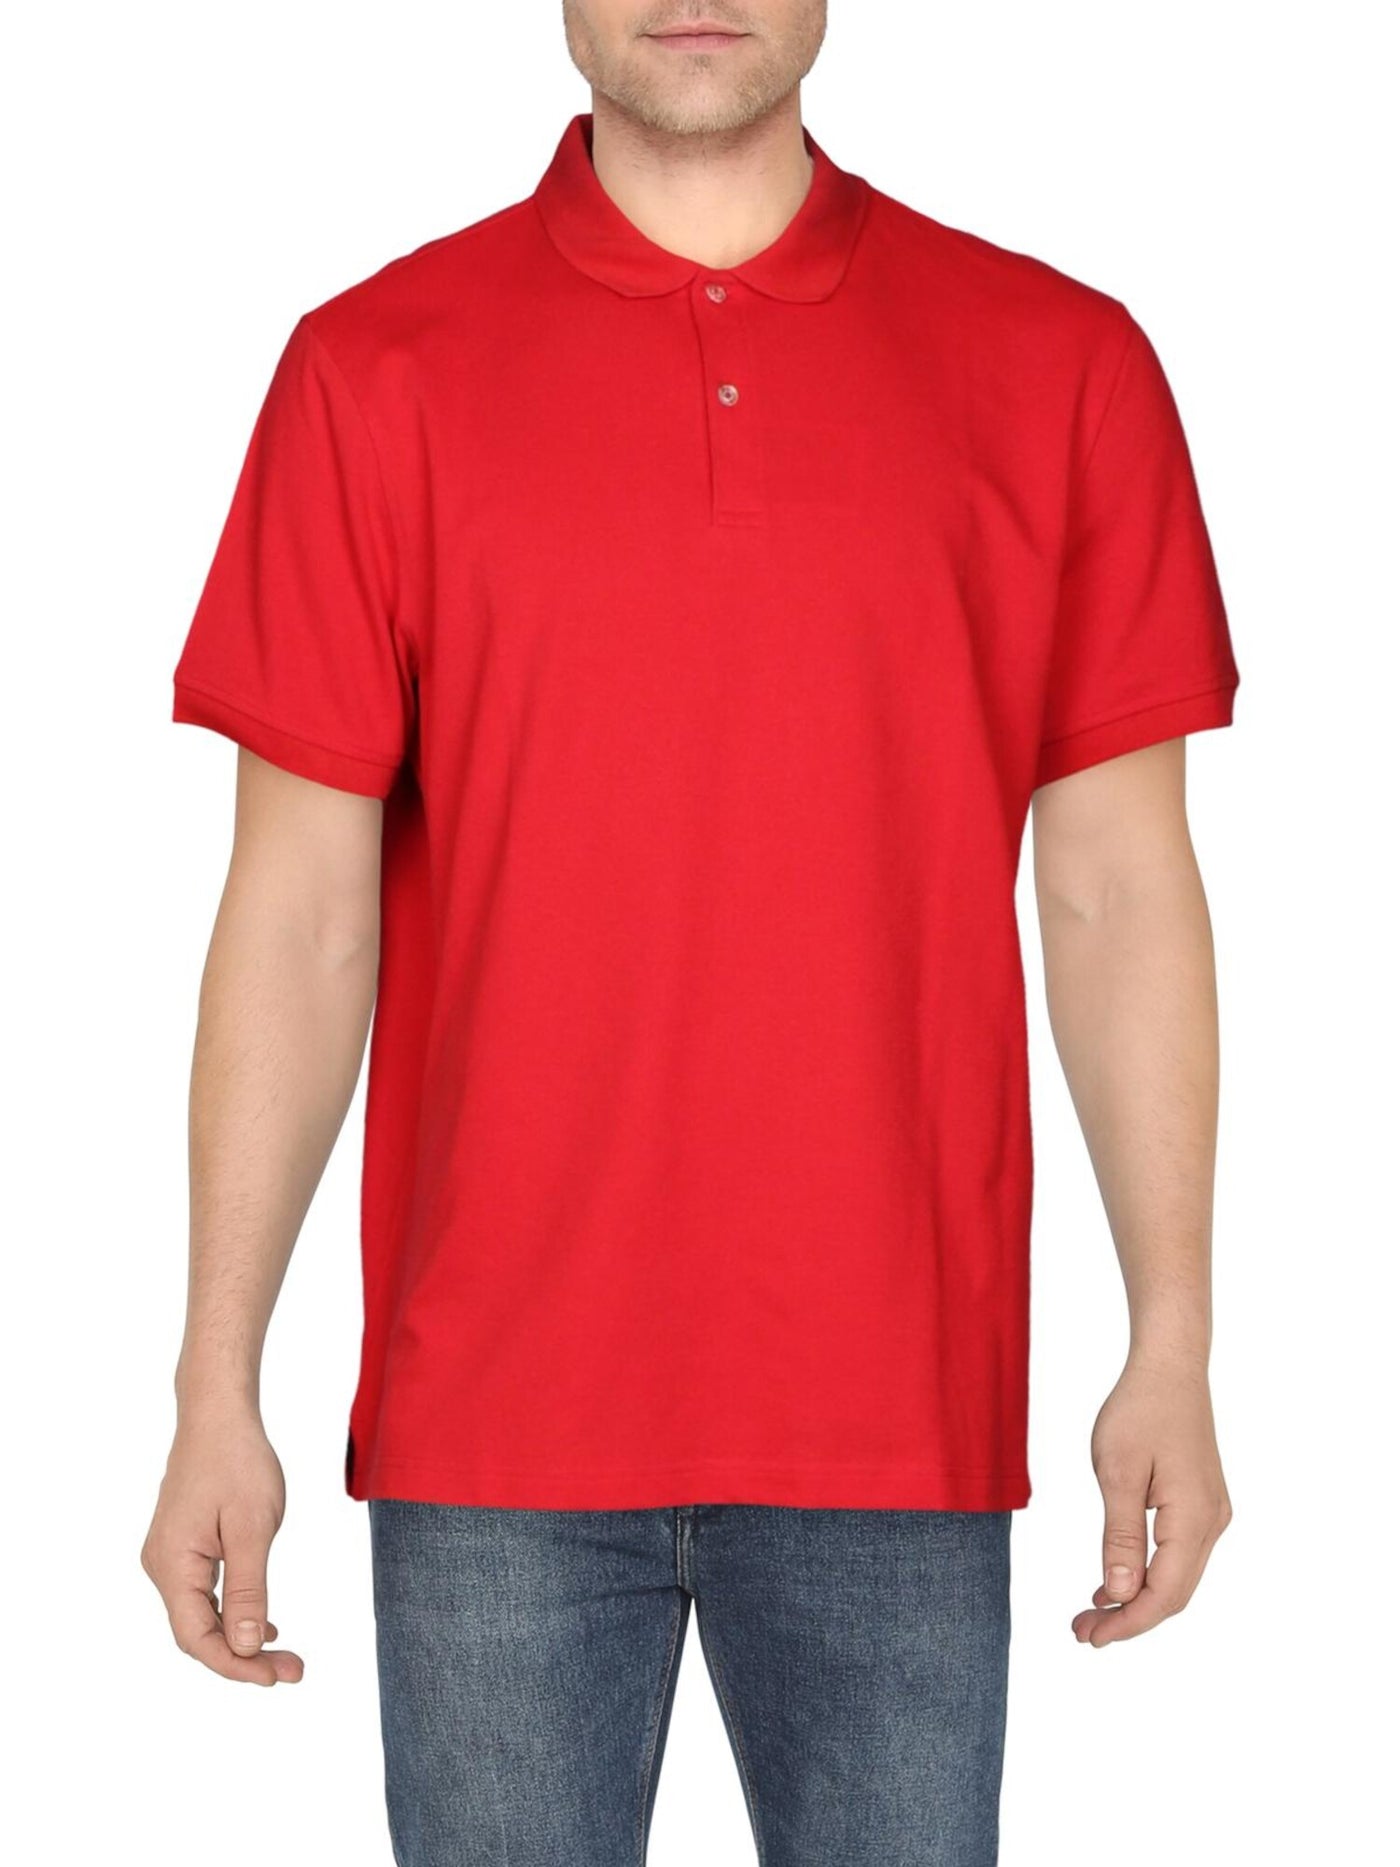 CLUBROOM Mens Red Classic Fit Cotton Polo S